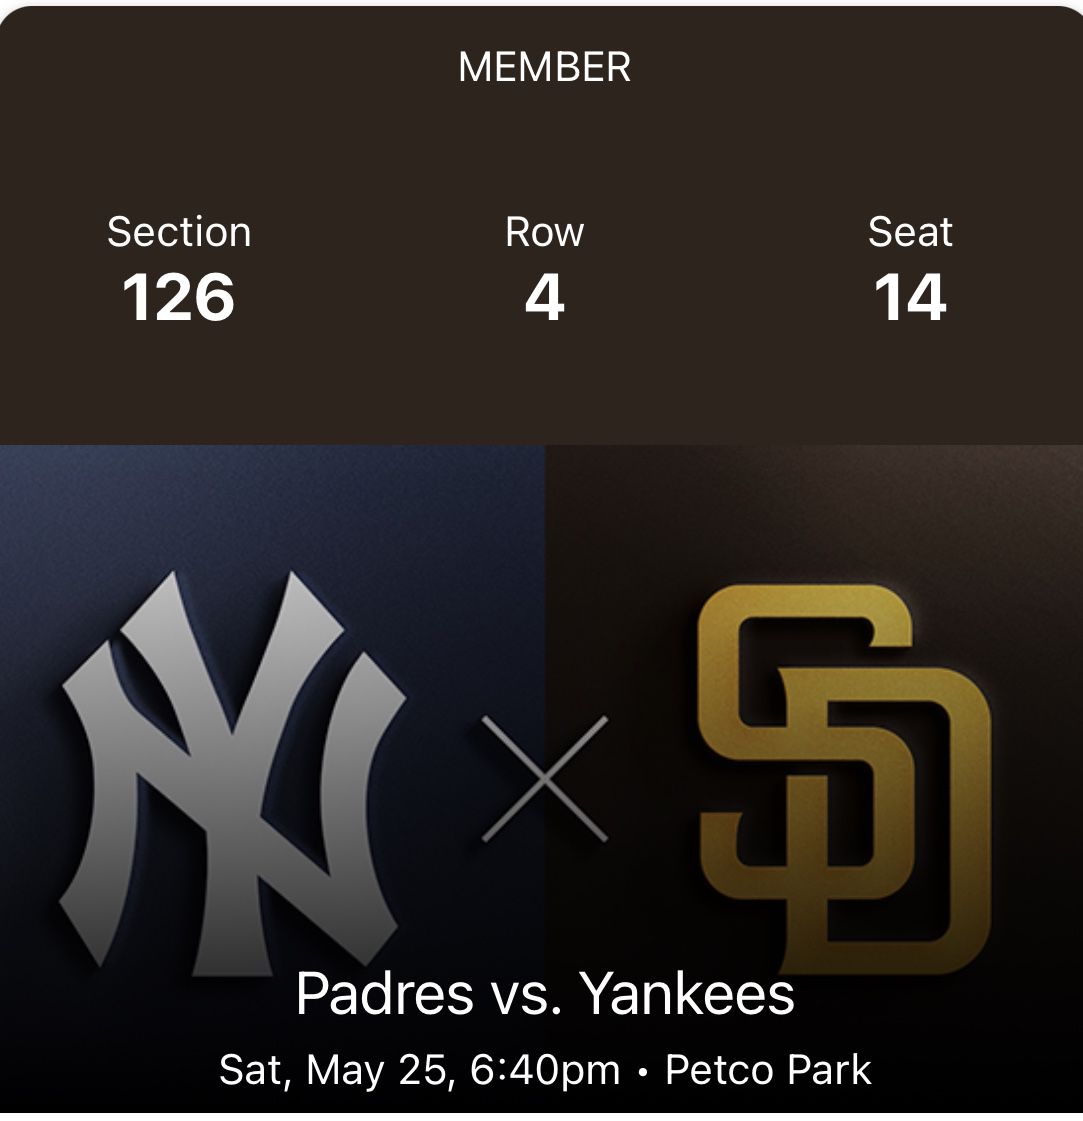 Yankees Vs Padres Saturday Section 126 Row 4 Two Seats 